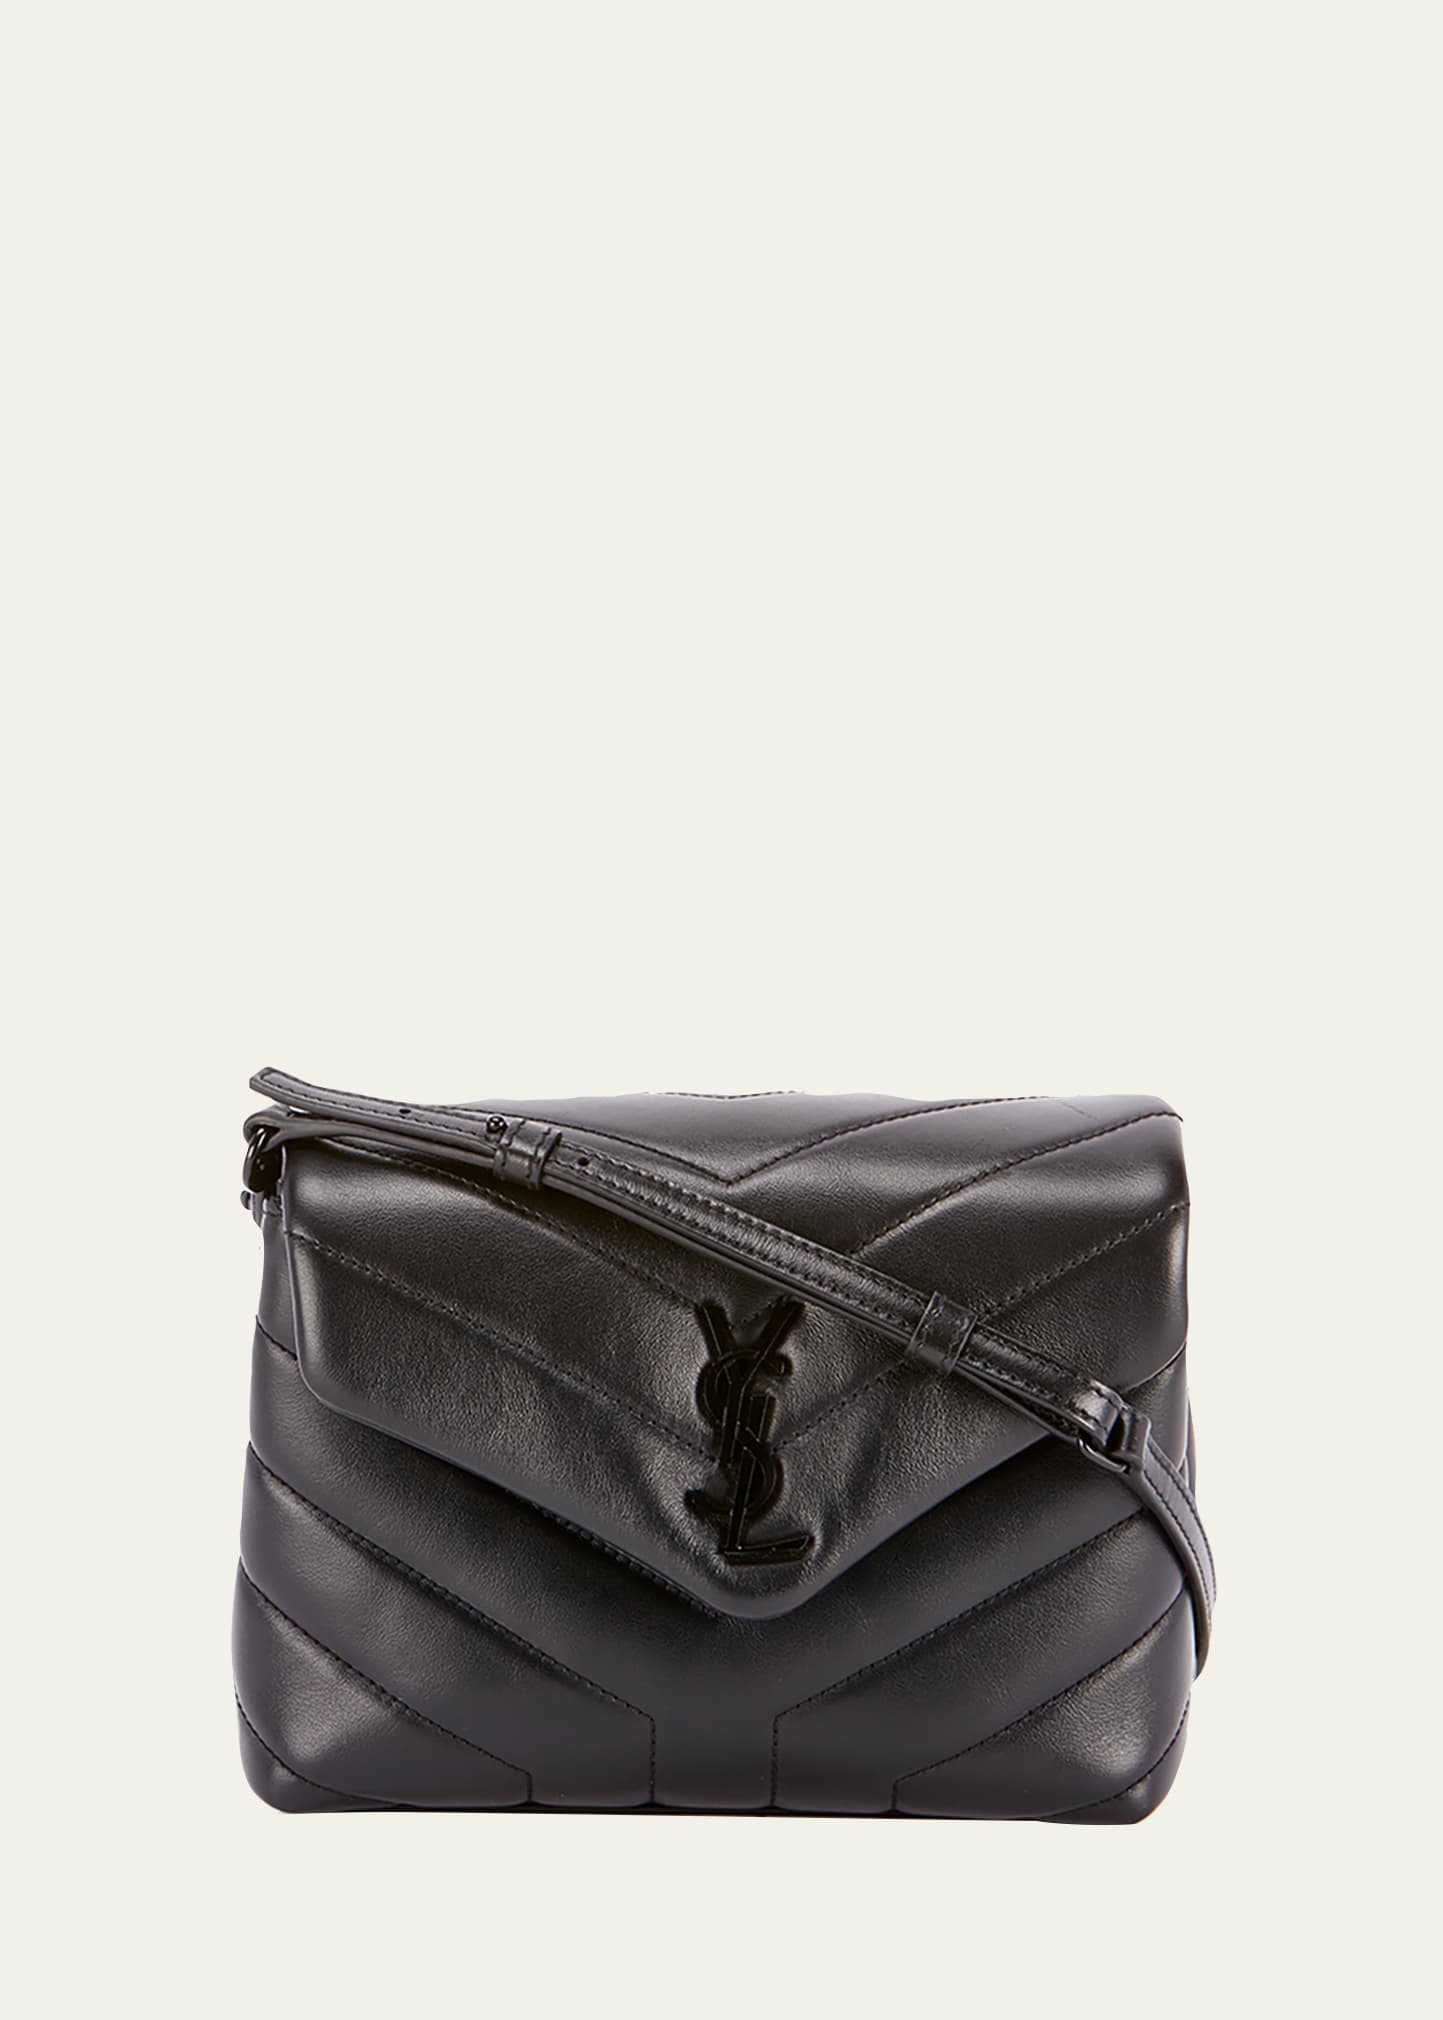 LOULOU TOY STRAP BAG IN MATELASSÉ Y LEATHER